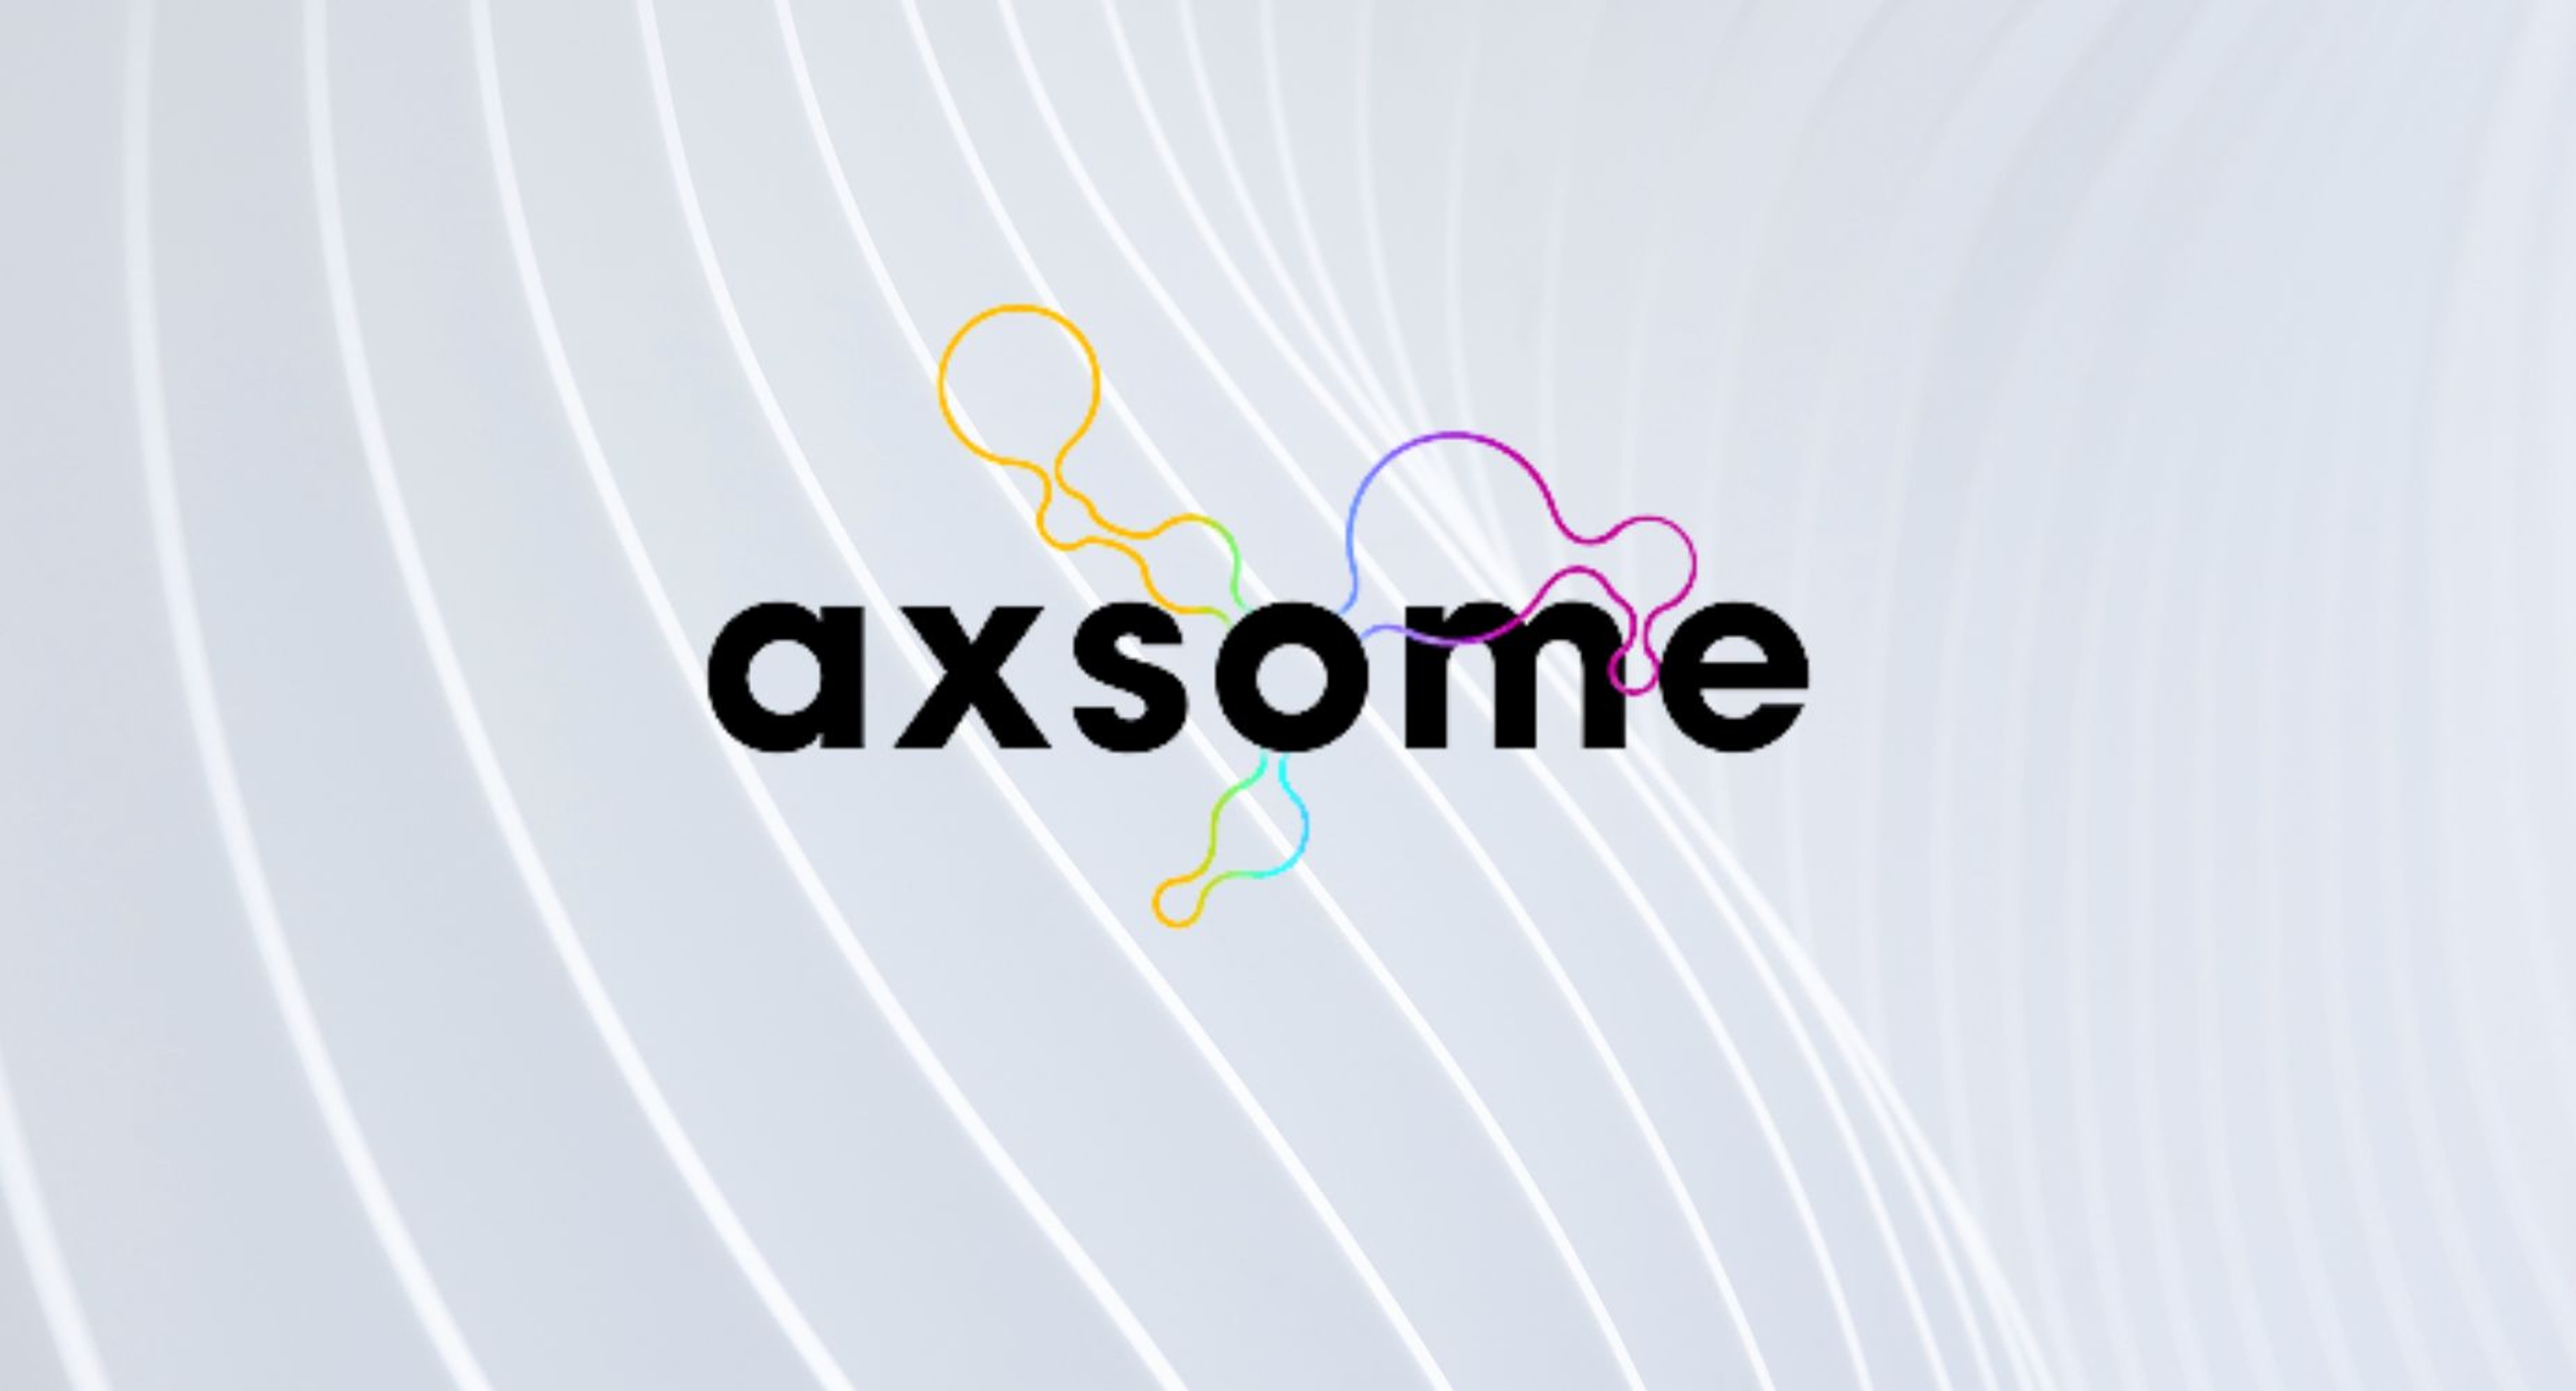 Axsome Therapeutics Rallies 40% On FDA Product Label Proposal, But Analyst Remains Skeptical